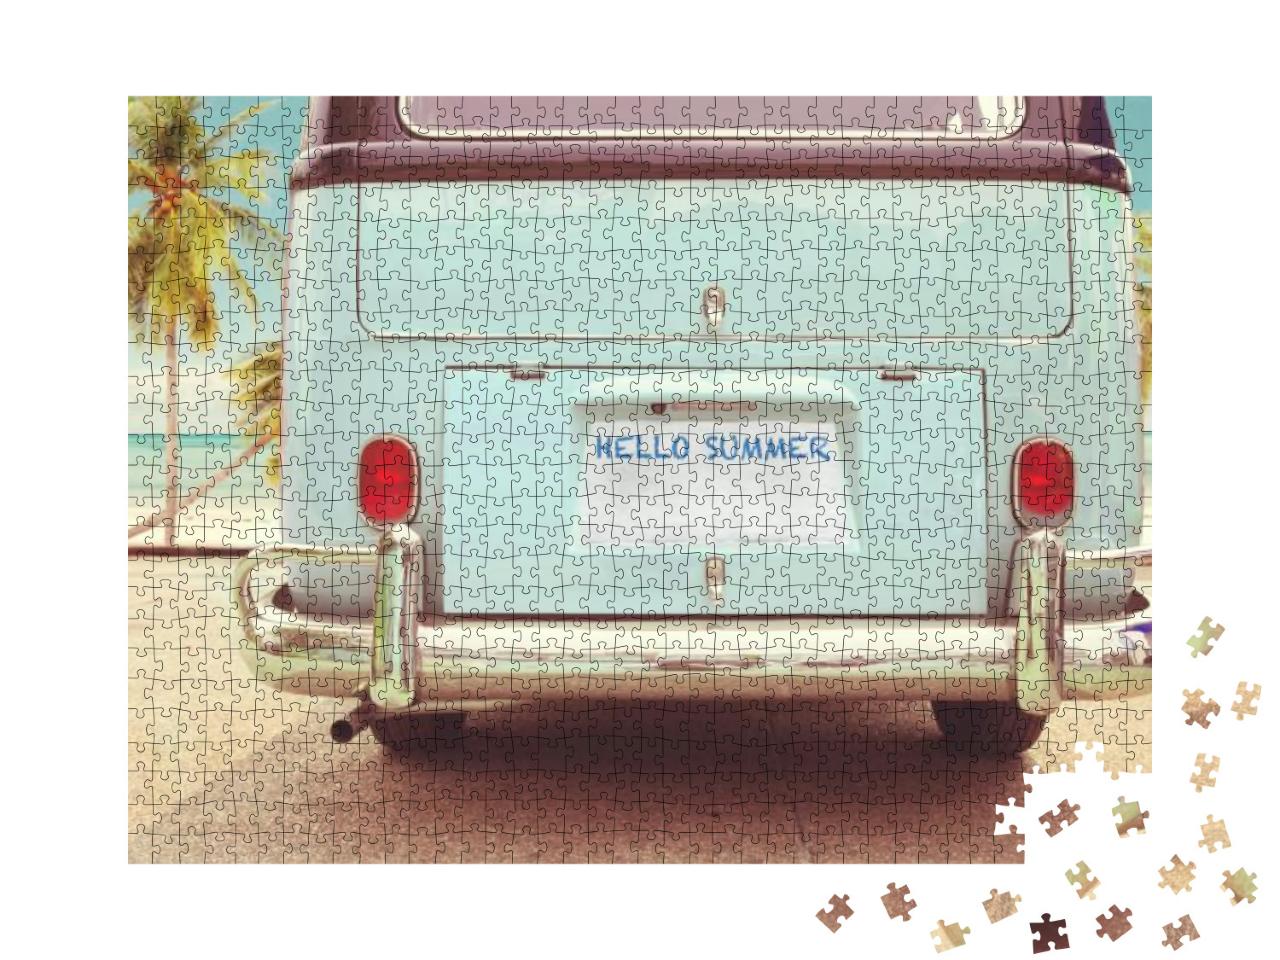 Journey of Holiday - Rear of Vintage Classic Van Parked S... Jigsaw Puzzle with 1000 pieces